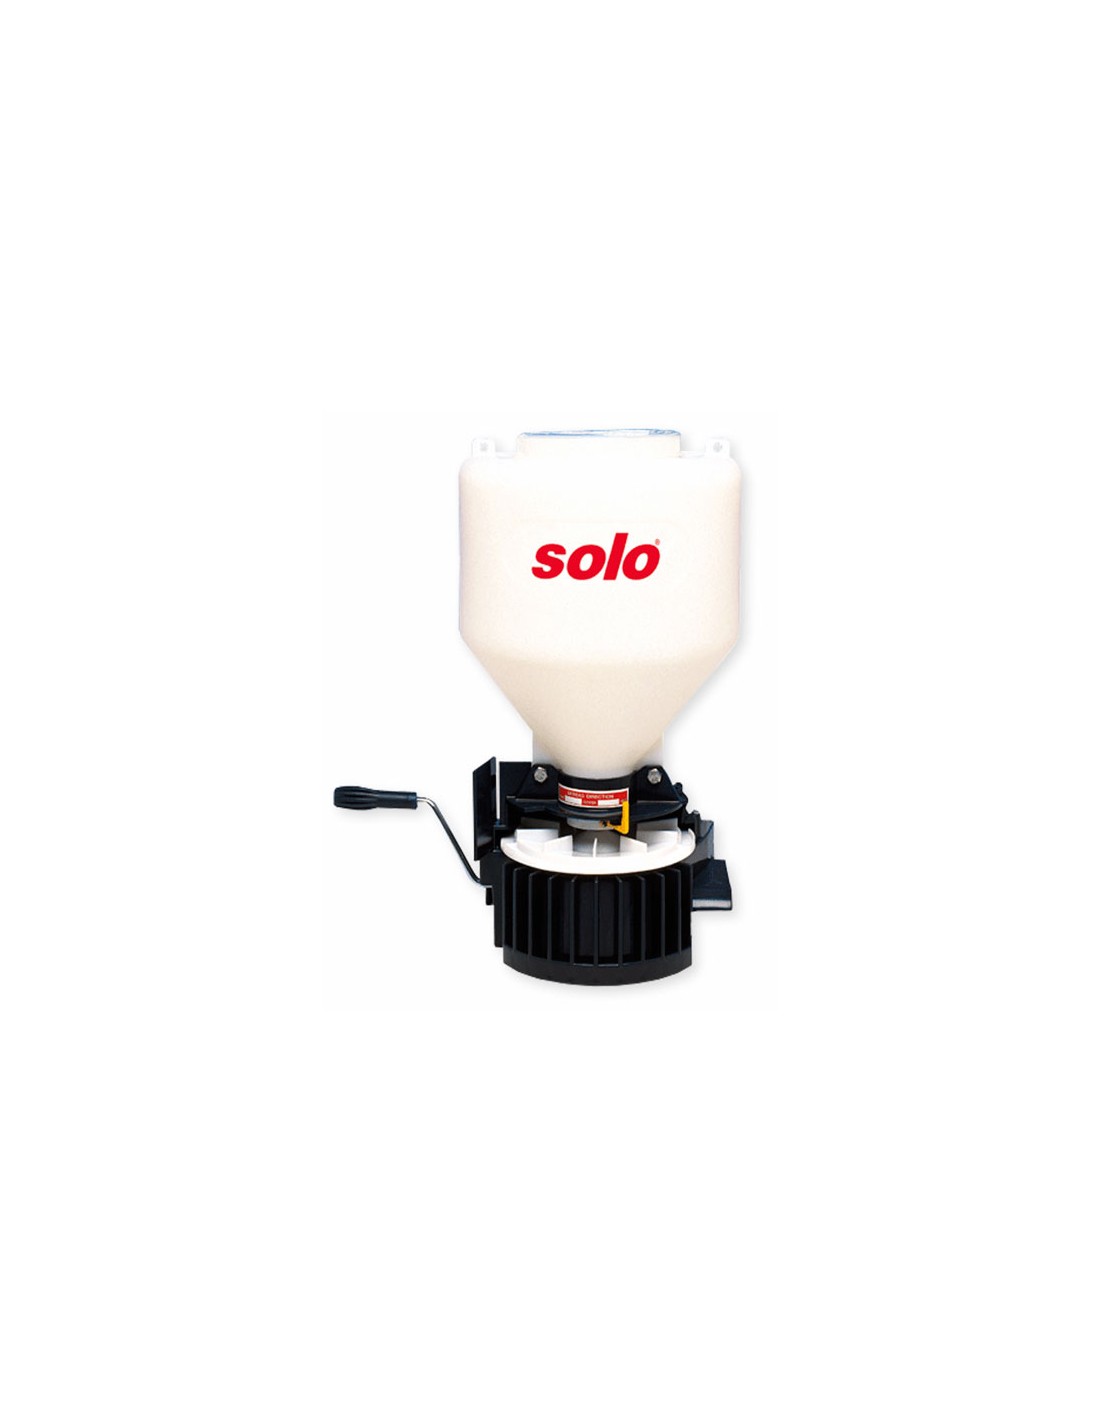 Solo Chemical Granule Spreader Questions & Answers